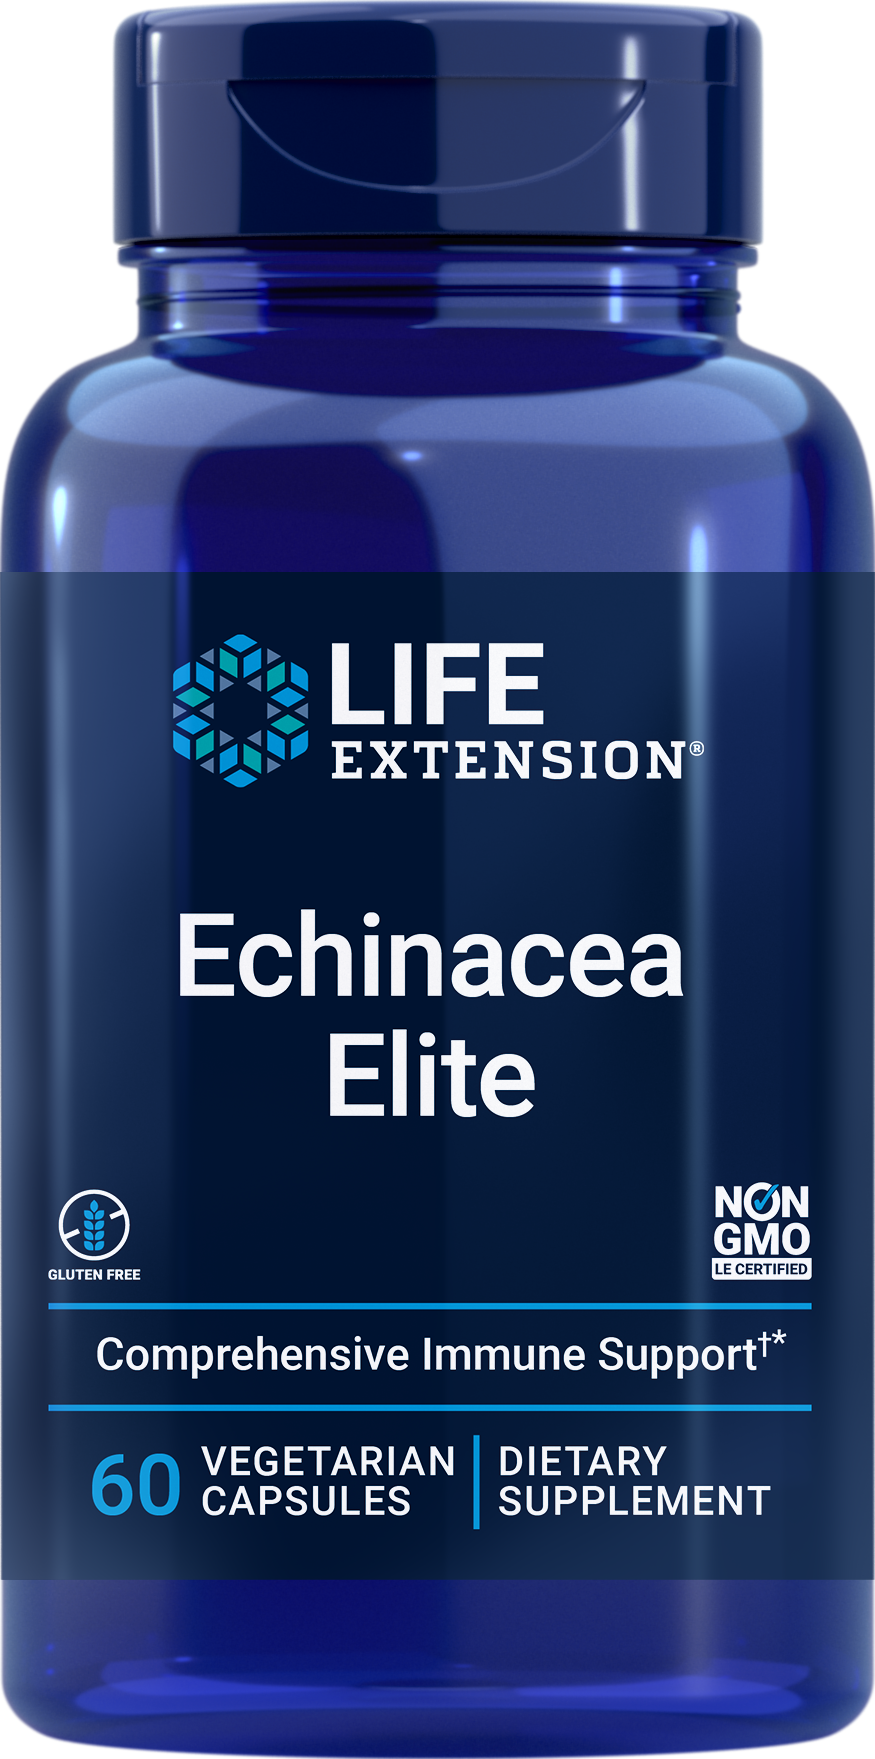 Echinacea Elite Fights Immune Challenges  with Two Types of Echinacea Standardized Extracts